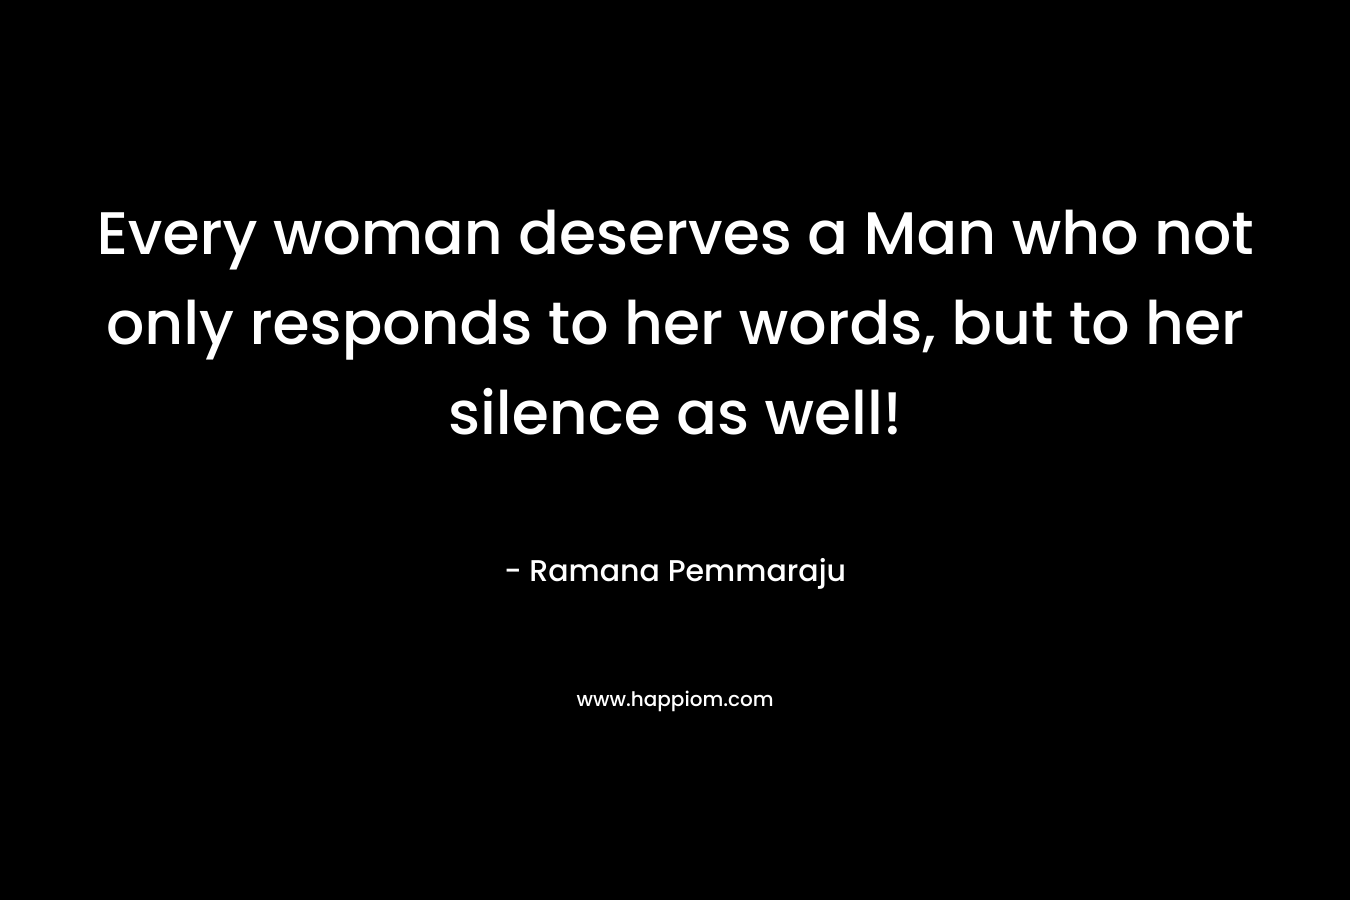 Every woman deserves a Man who not only responds to her words, but to her silence as well! – Ramana Pemmaraju